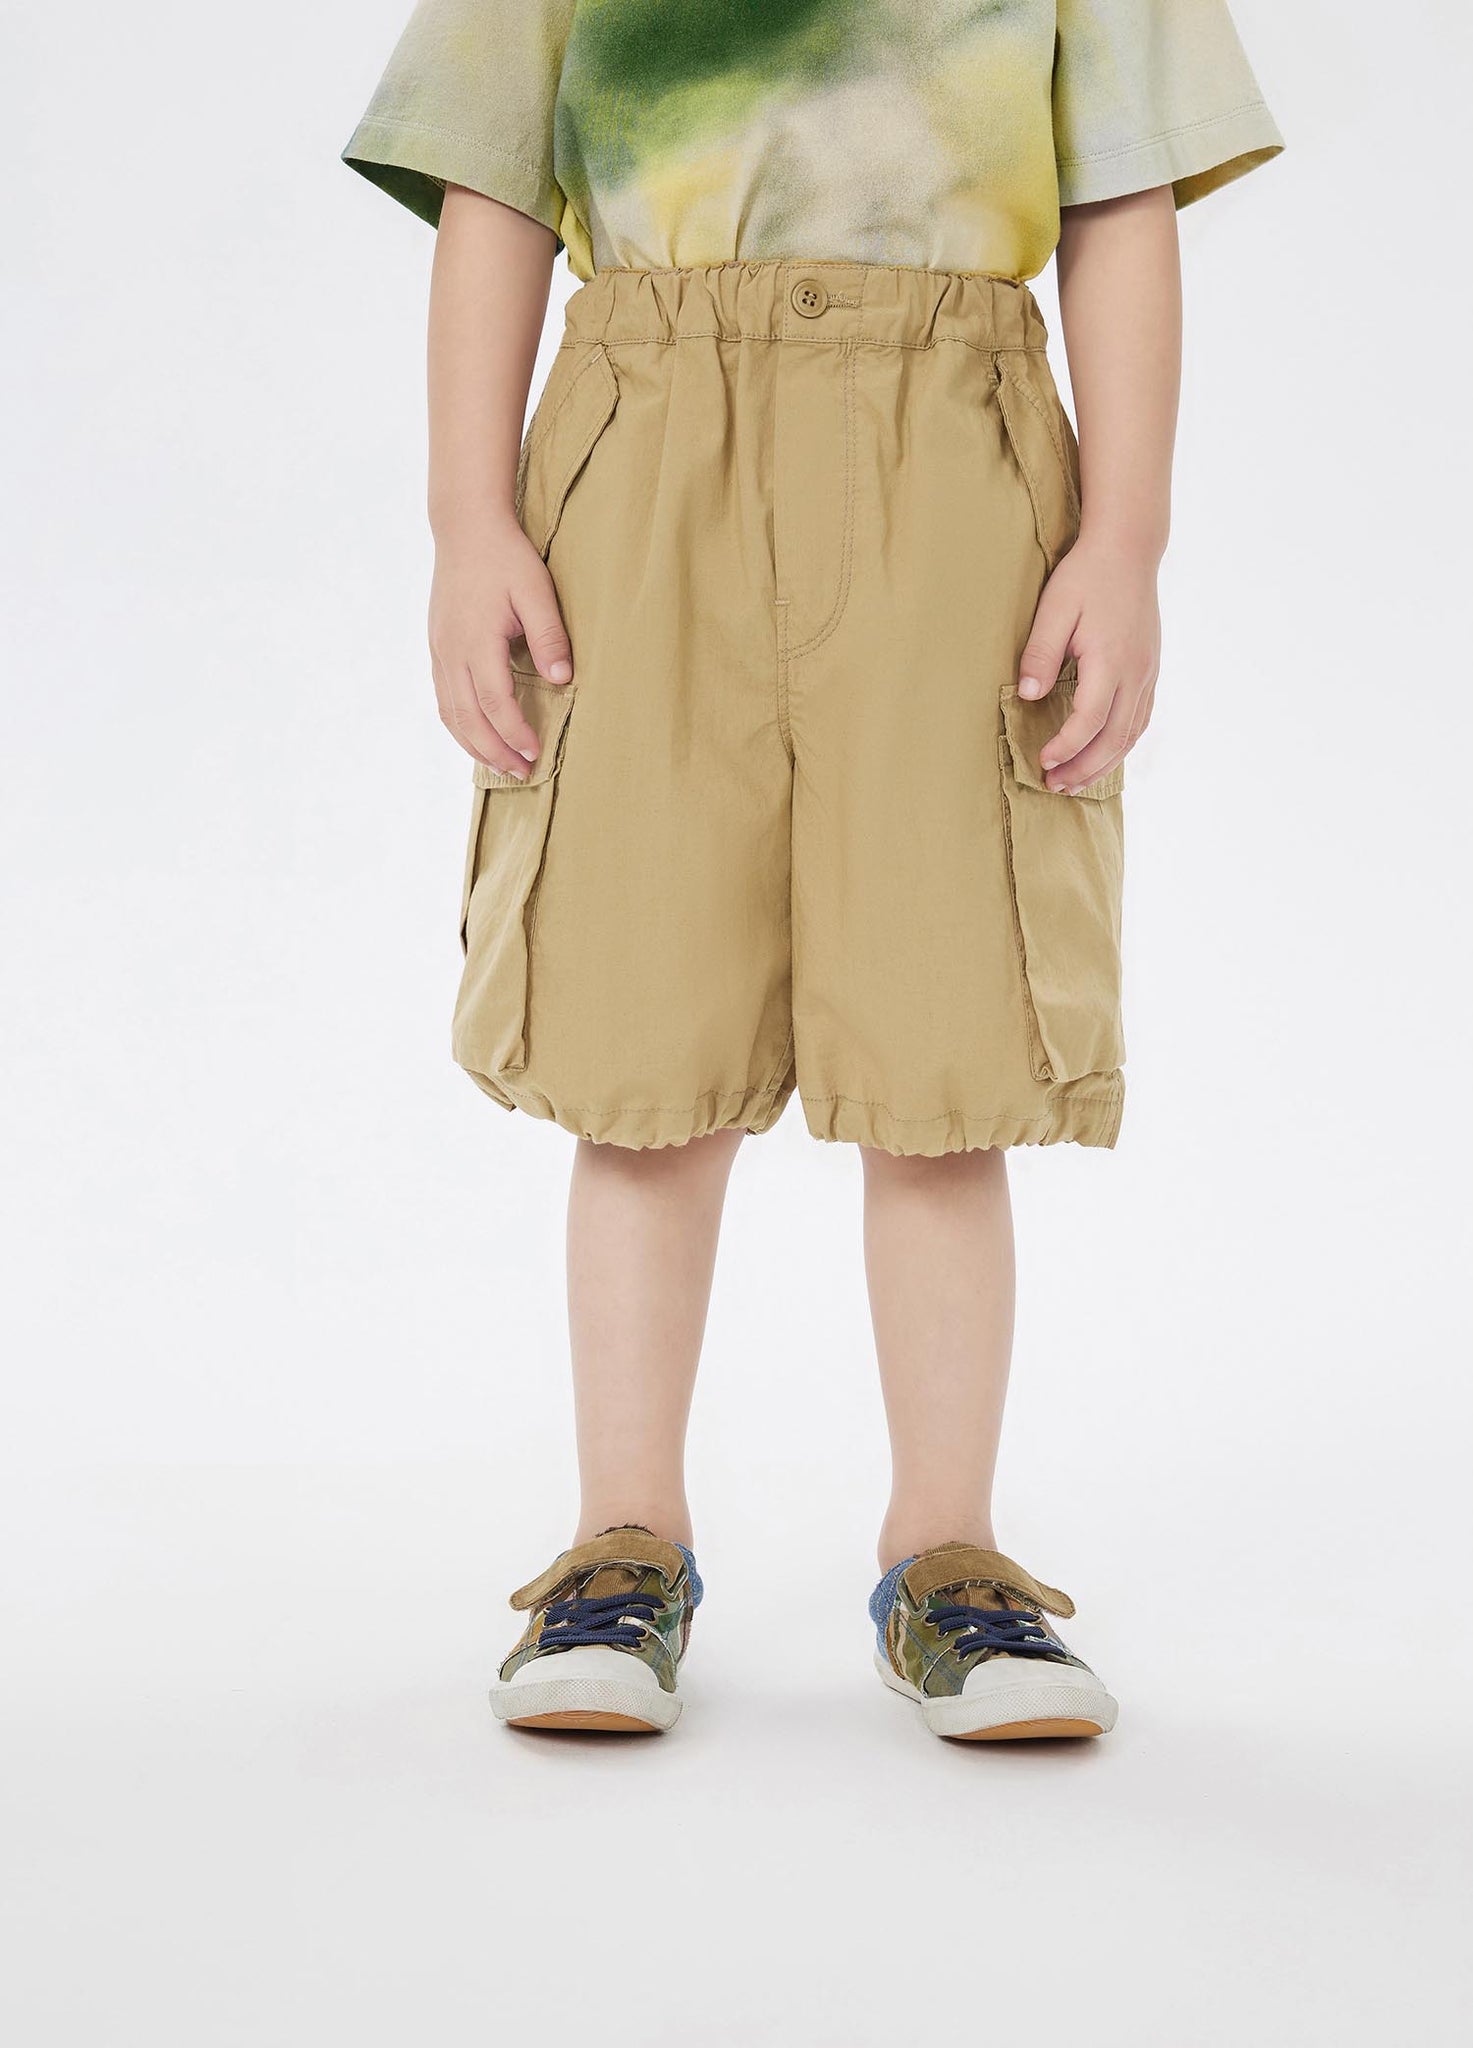 Shorts / jnby by JNBY Loose Fit Cotton-Linen Blended Shorts